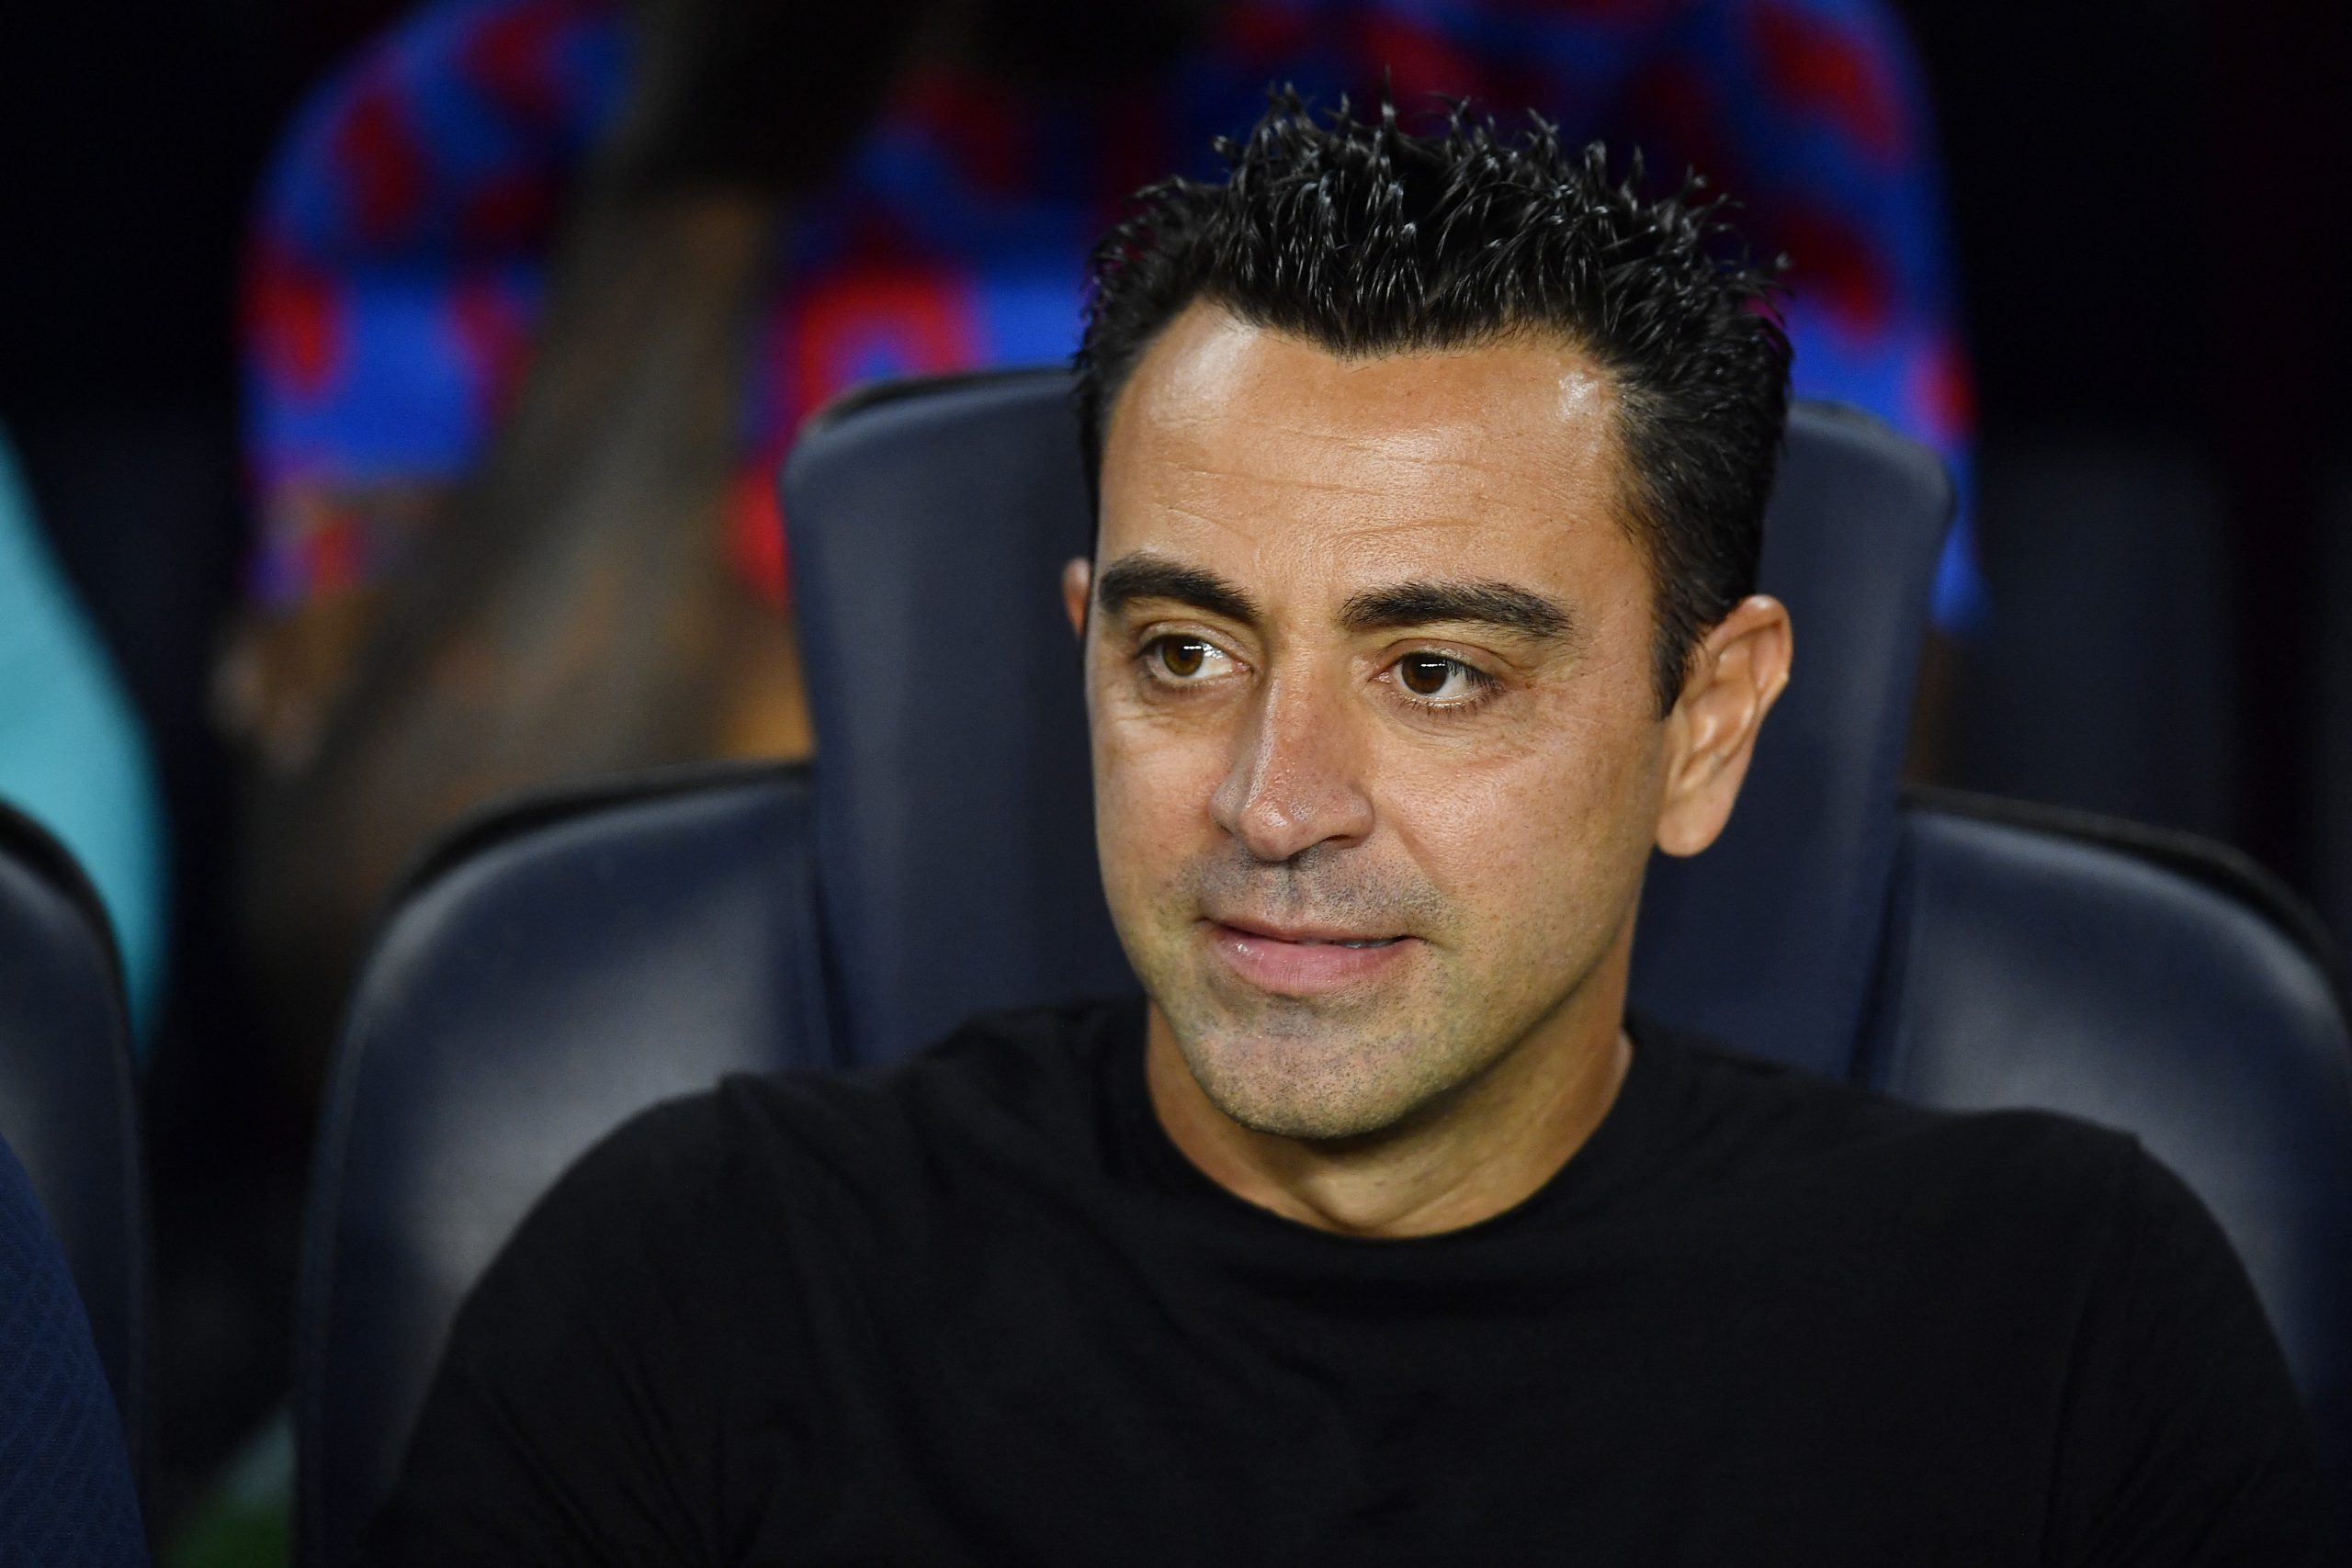 Xavi Hernandez speaks about Sergino Dest’s future amid rumours he could leave Barcelona